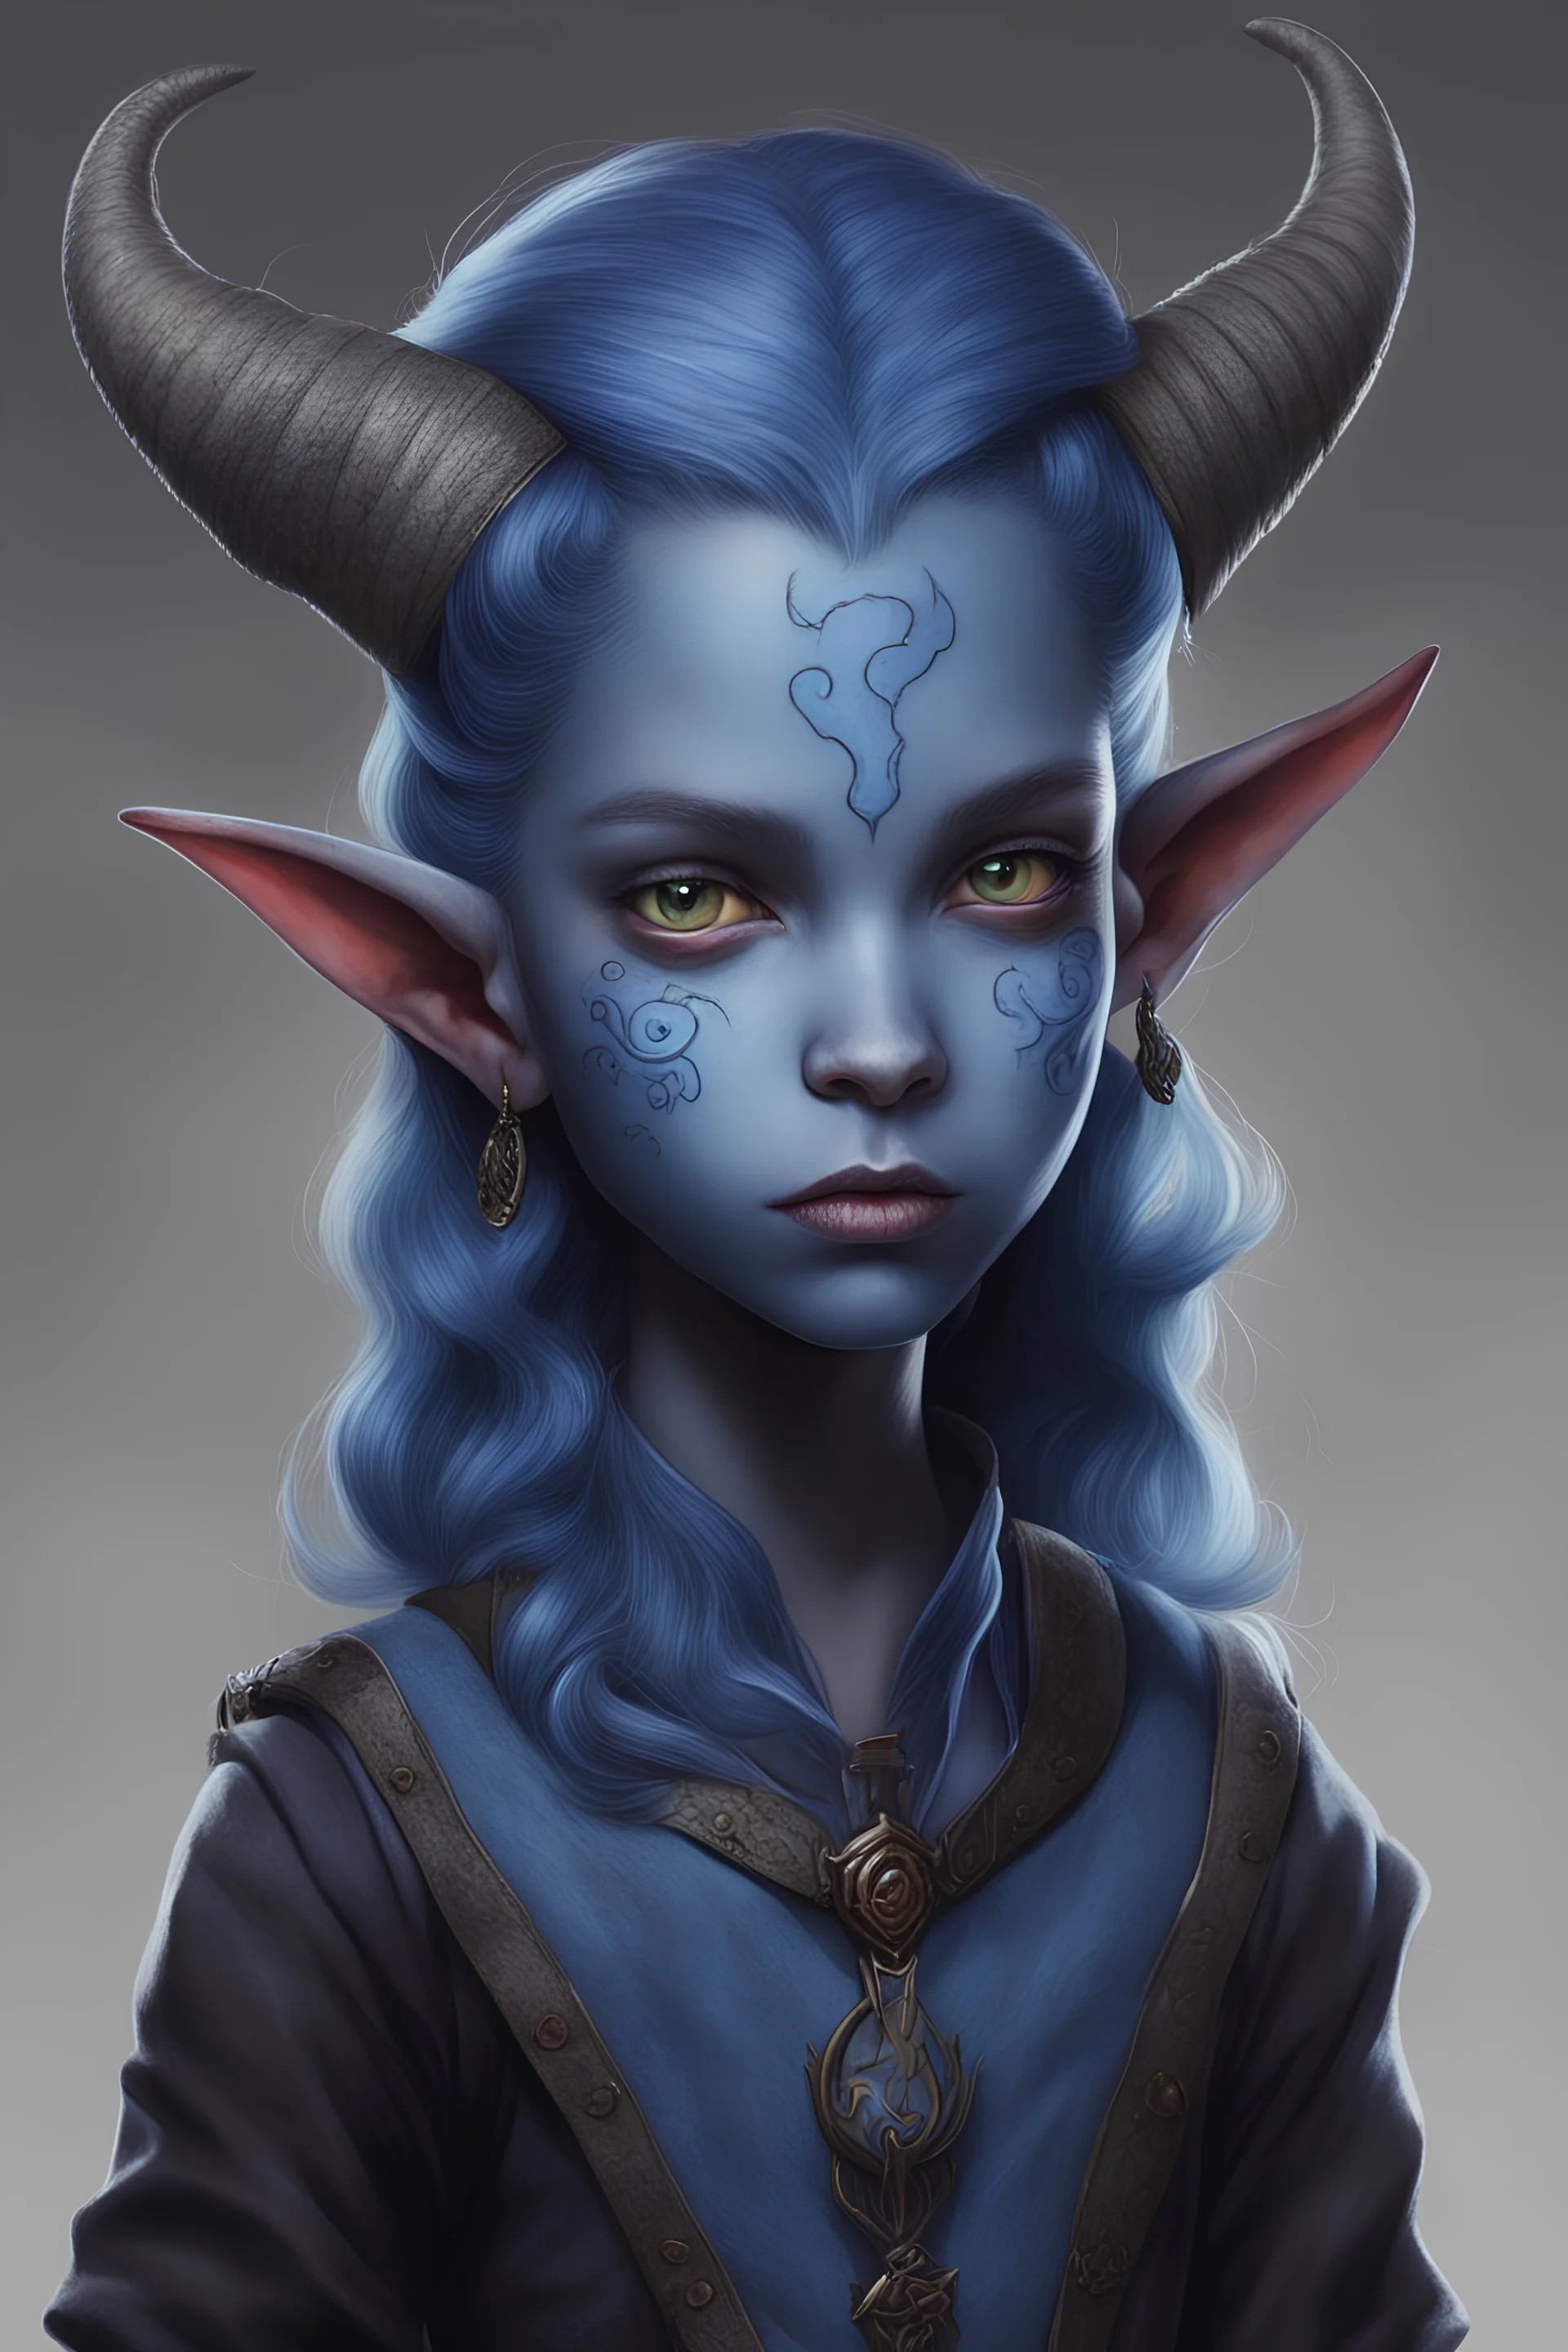 a tiefling 12-year-old child, blue skin